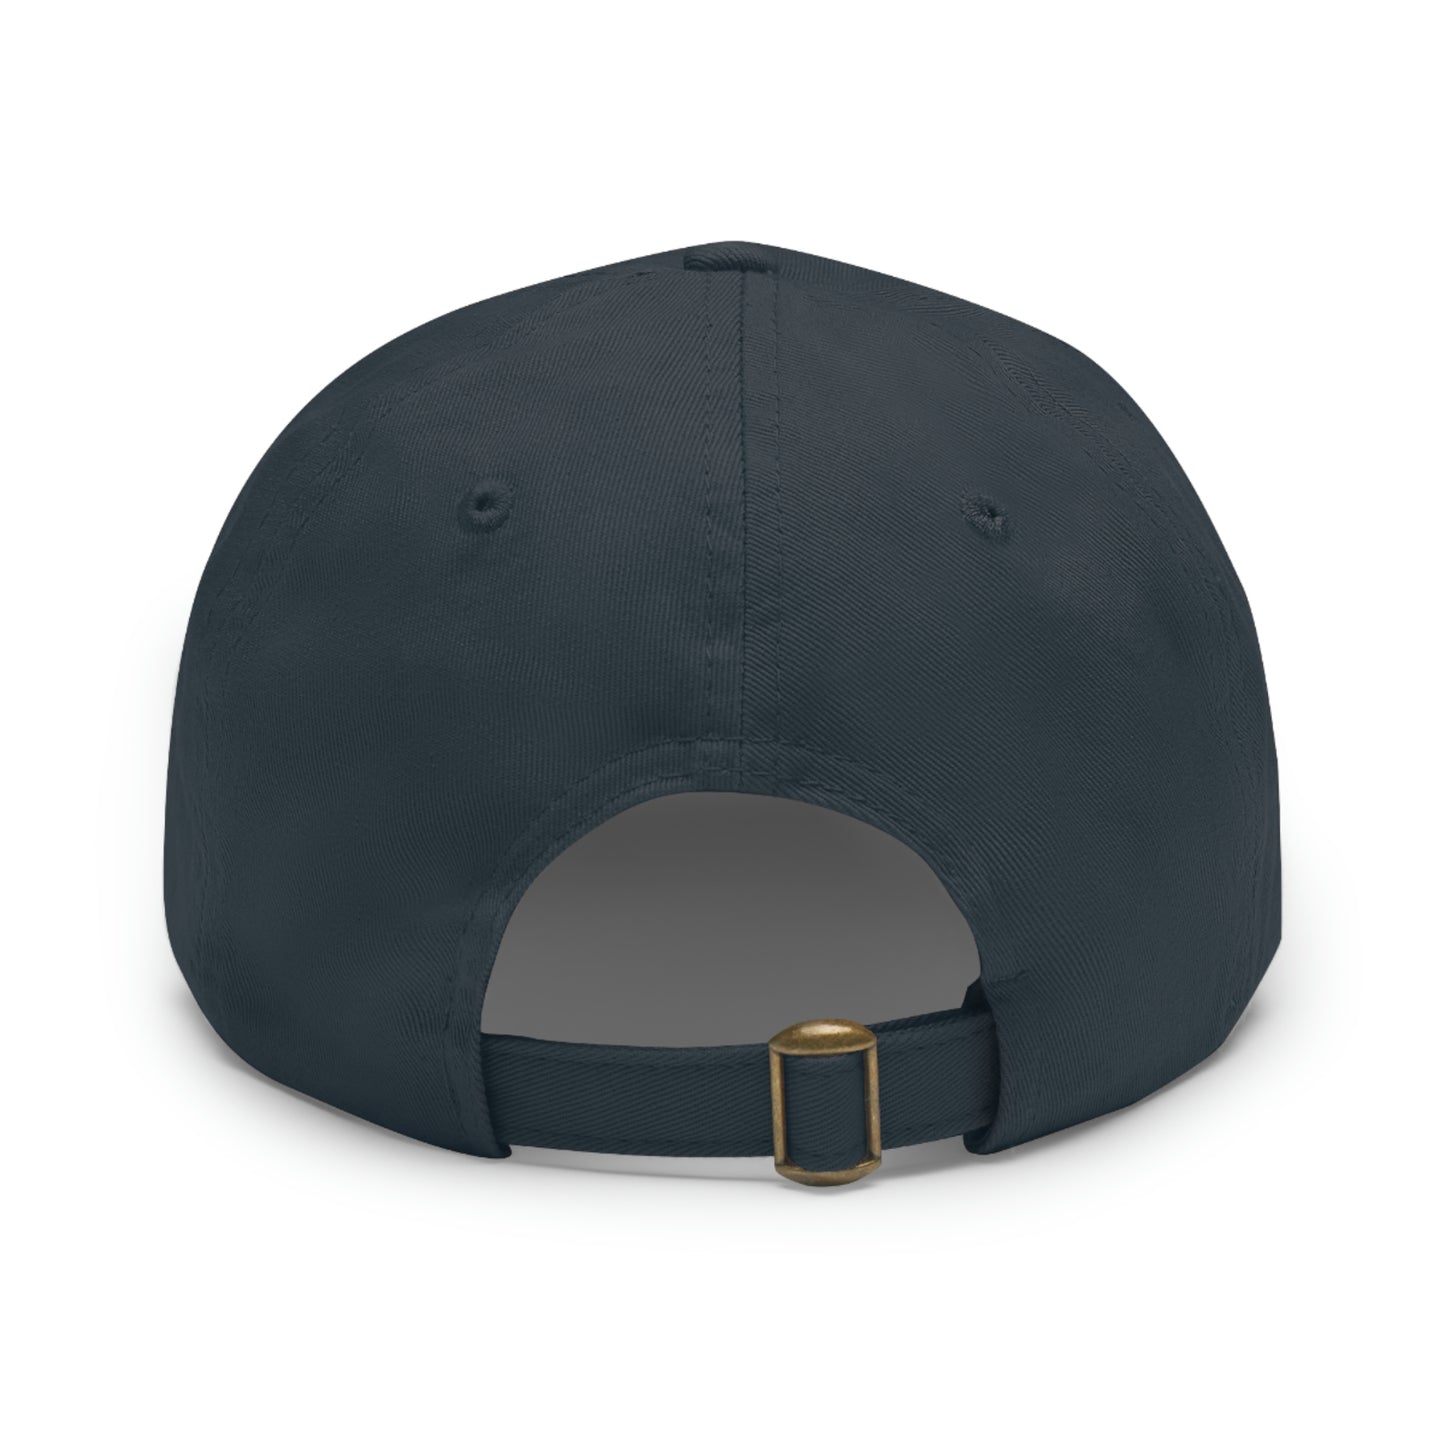 Hat with Leather Patch (Round) - Amateur AF